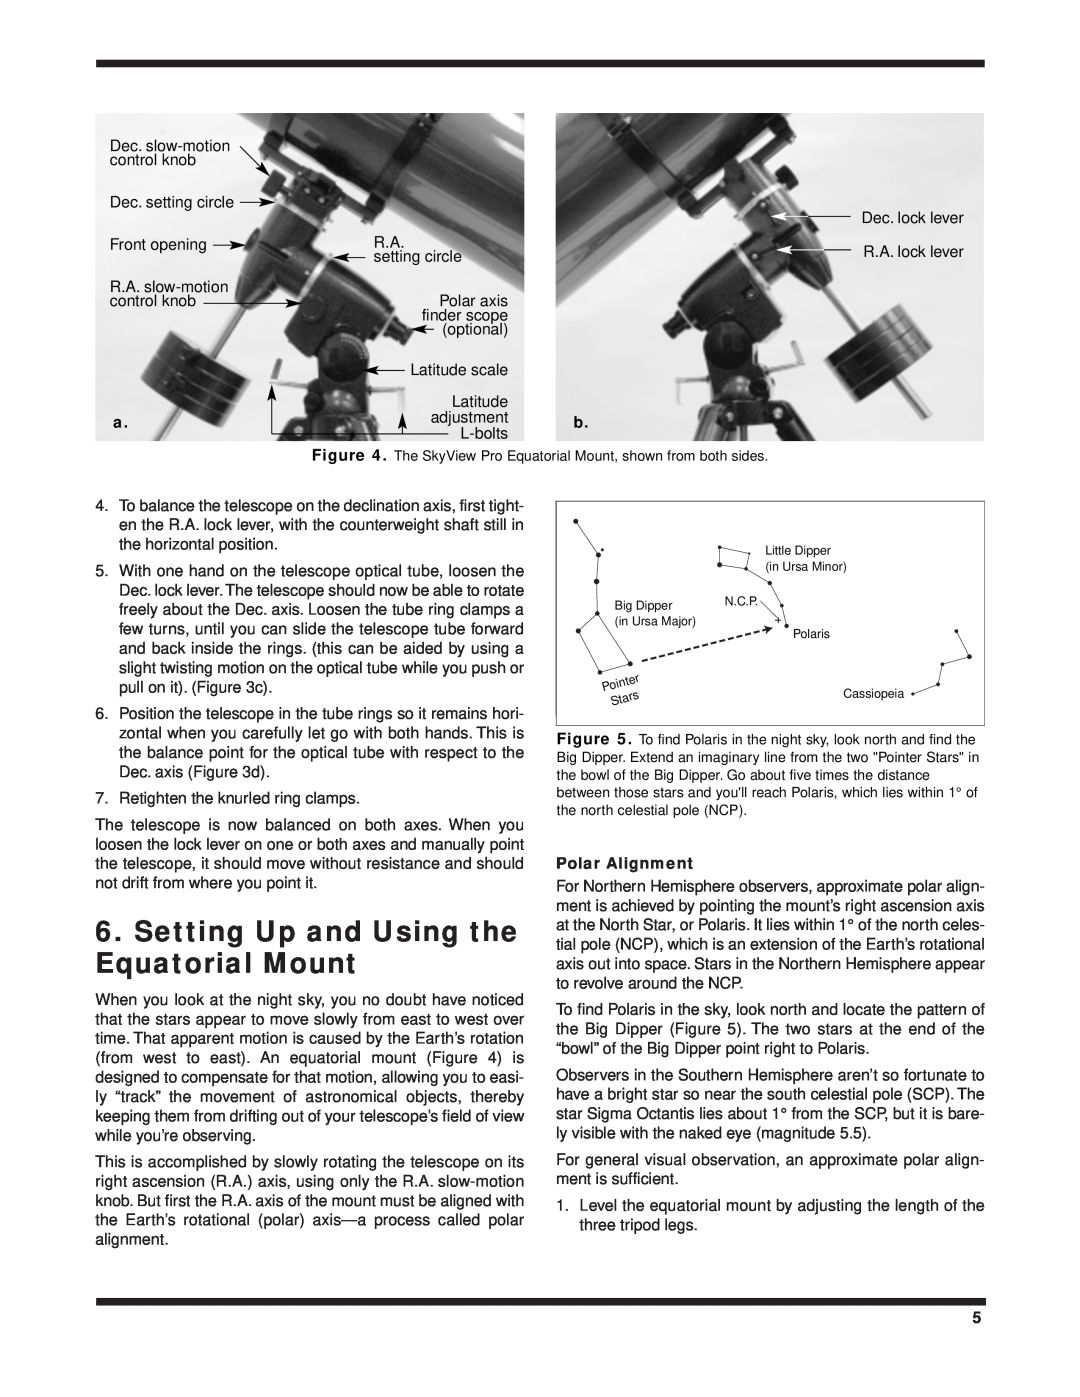 Orion 9829 instruction manual Setting Up and Using the Equatorial Mount, Polar Alignment 